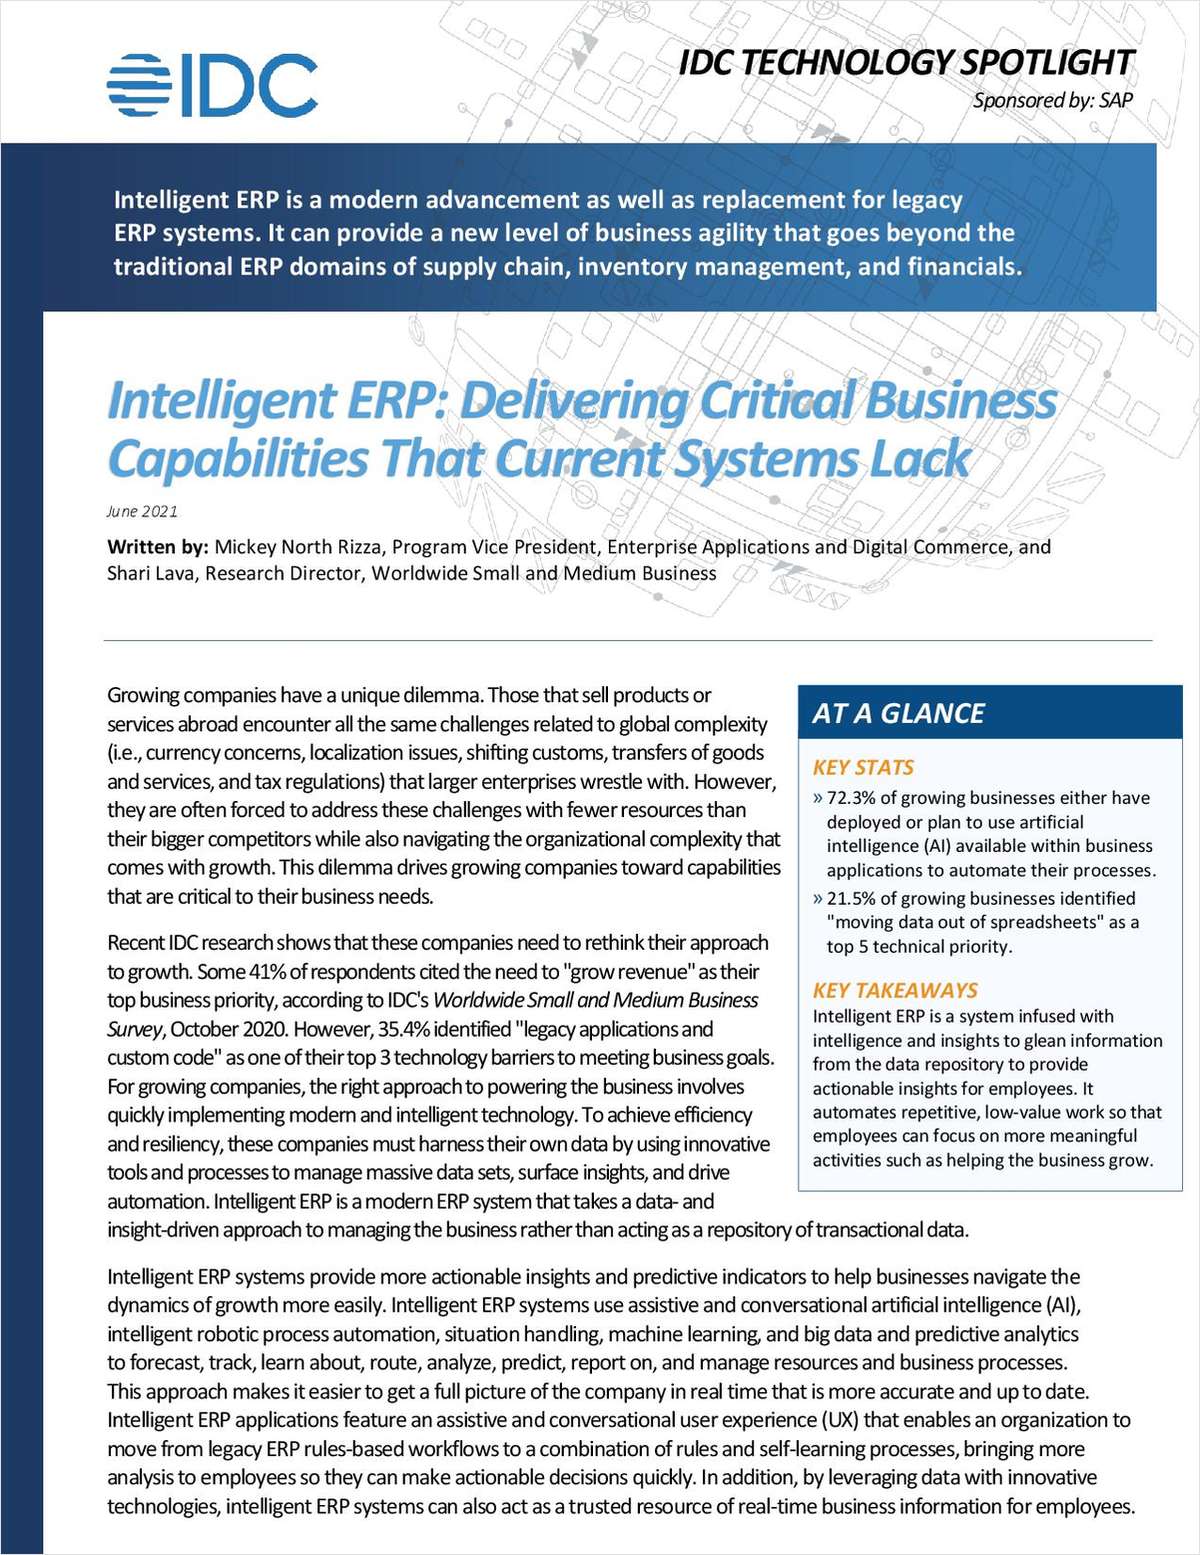 Intelligent ERP: Delivering Critical Business Capabilities that Current Systems Lack